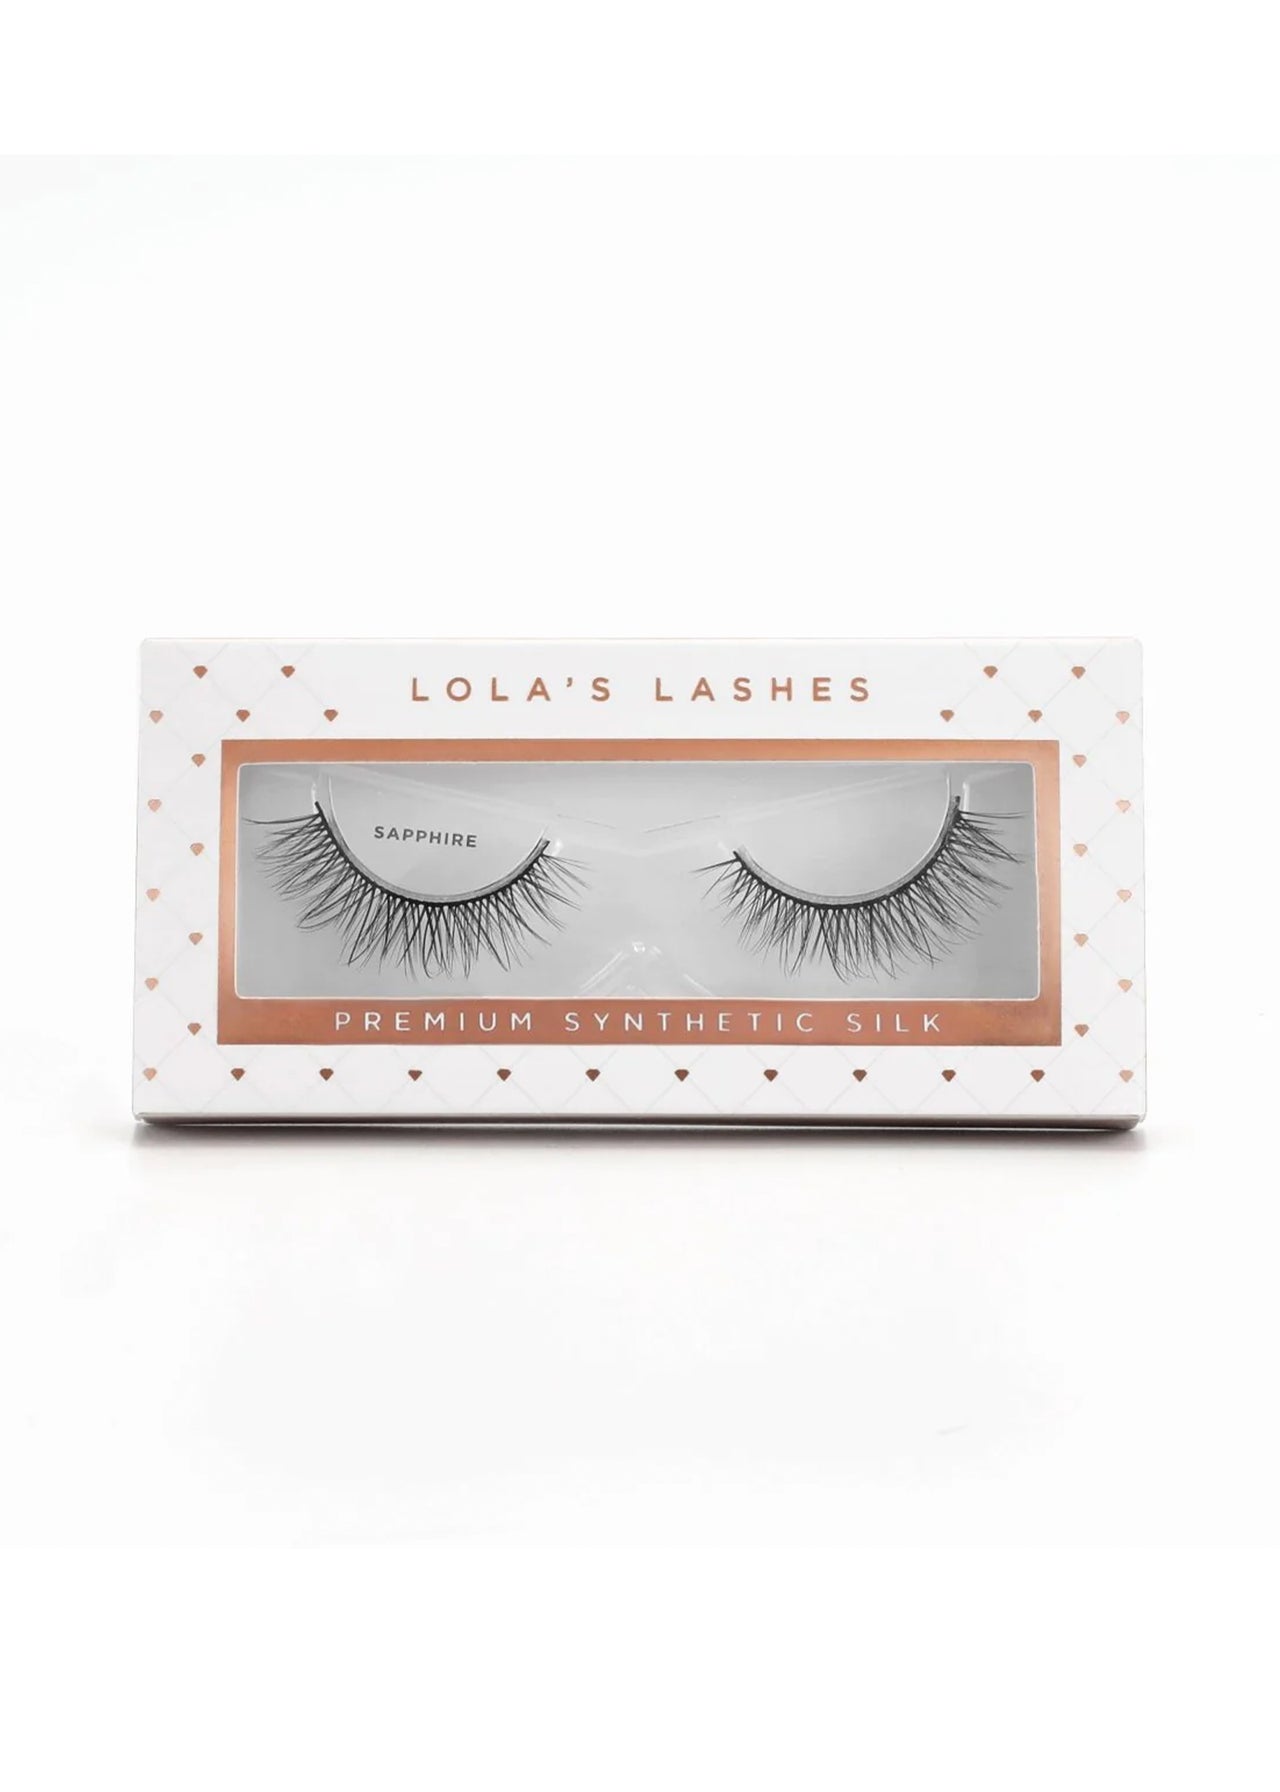 LOLA'S LASHES Synthetic Silk Sapphire Strip Lashes